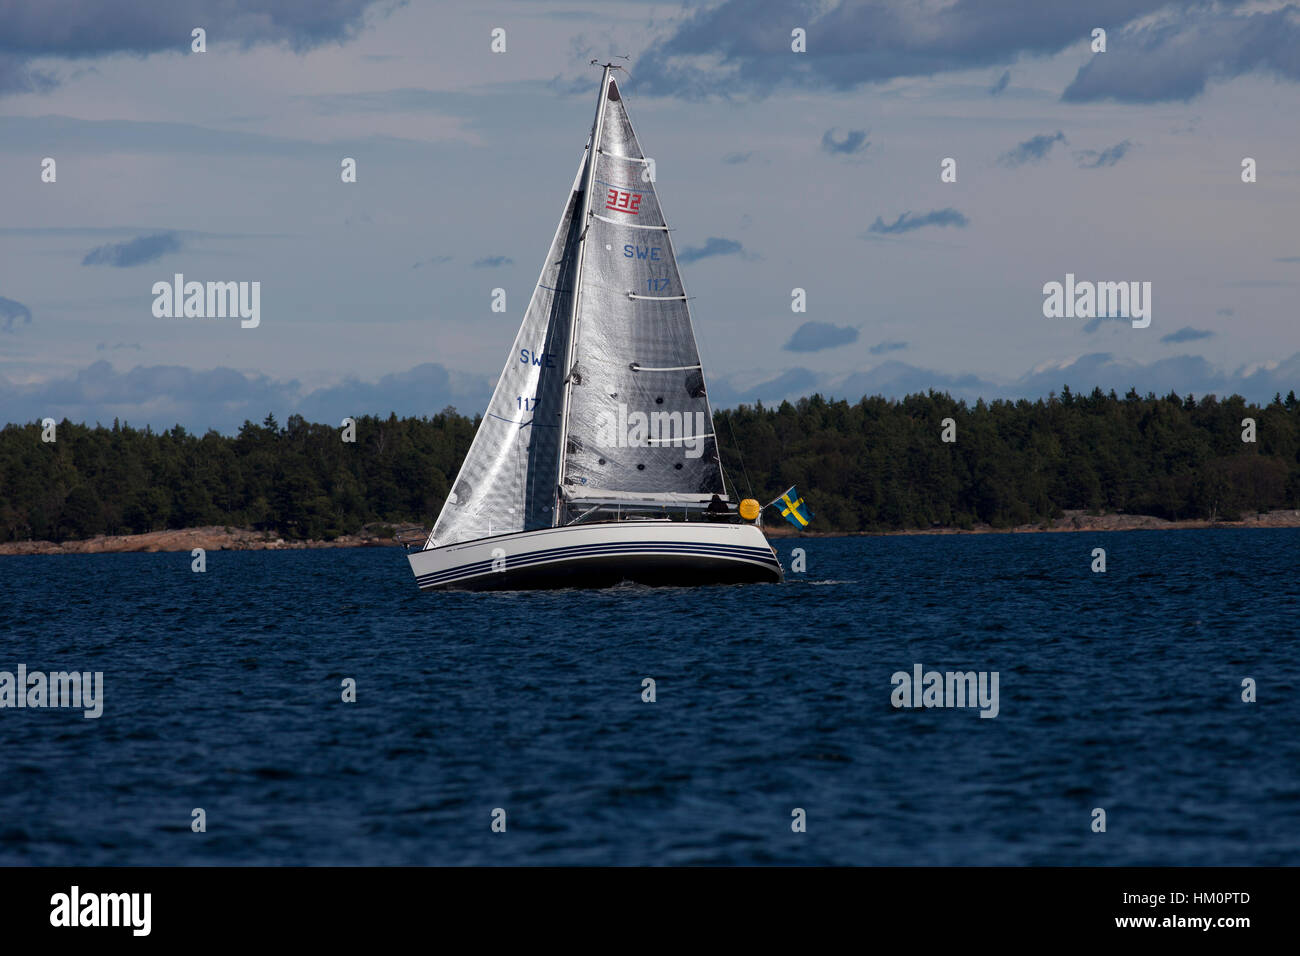 Big sailboat in the Swedish archipelago on a sunny summer day Stock Photo